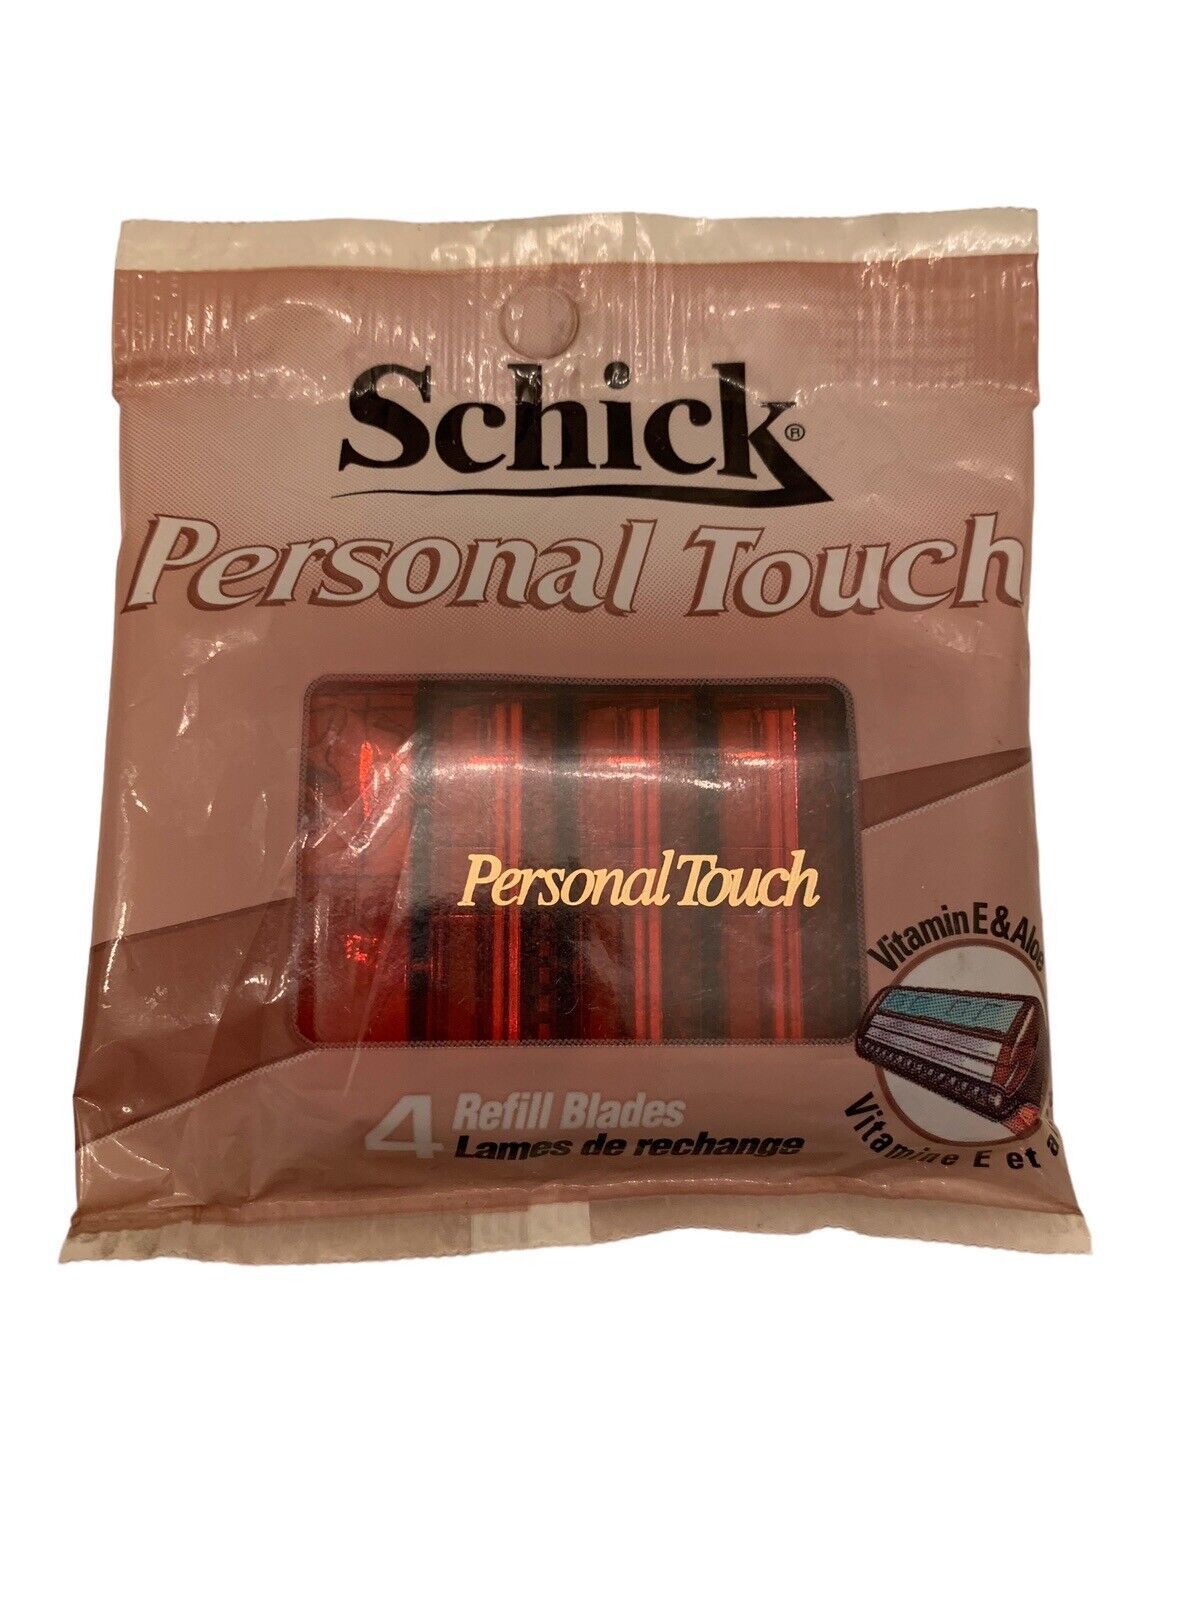 Schick Personal Touch Razor Refill Blades- 1 pack - 4 refills- Sealed - $46.74